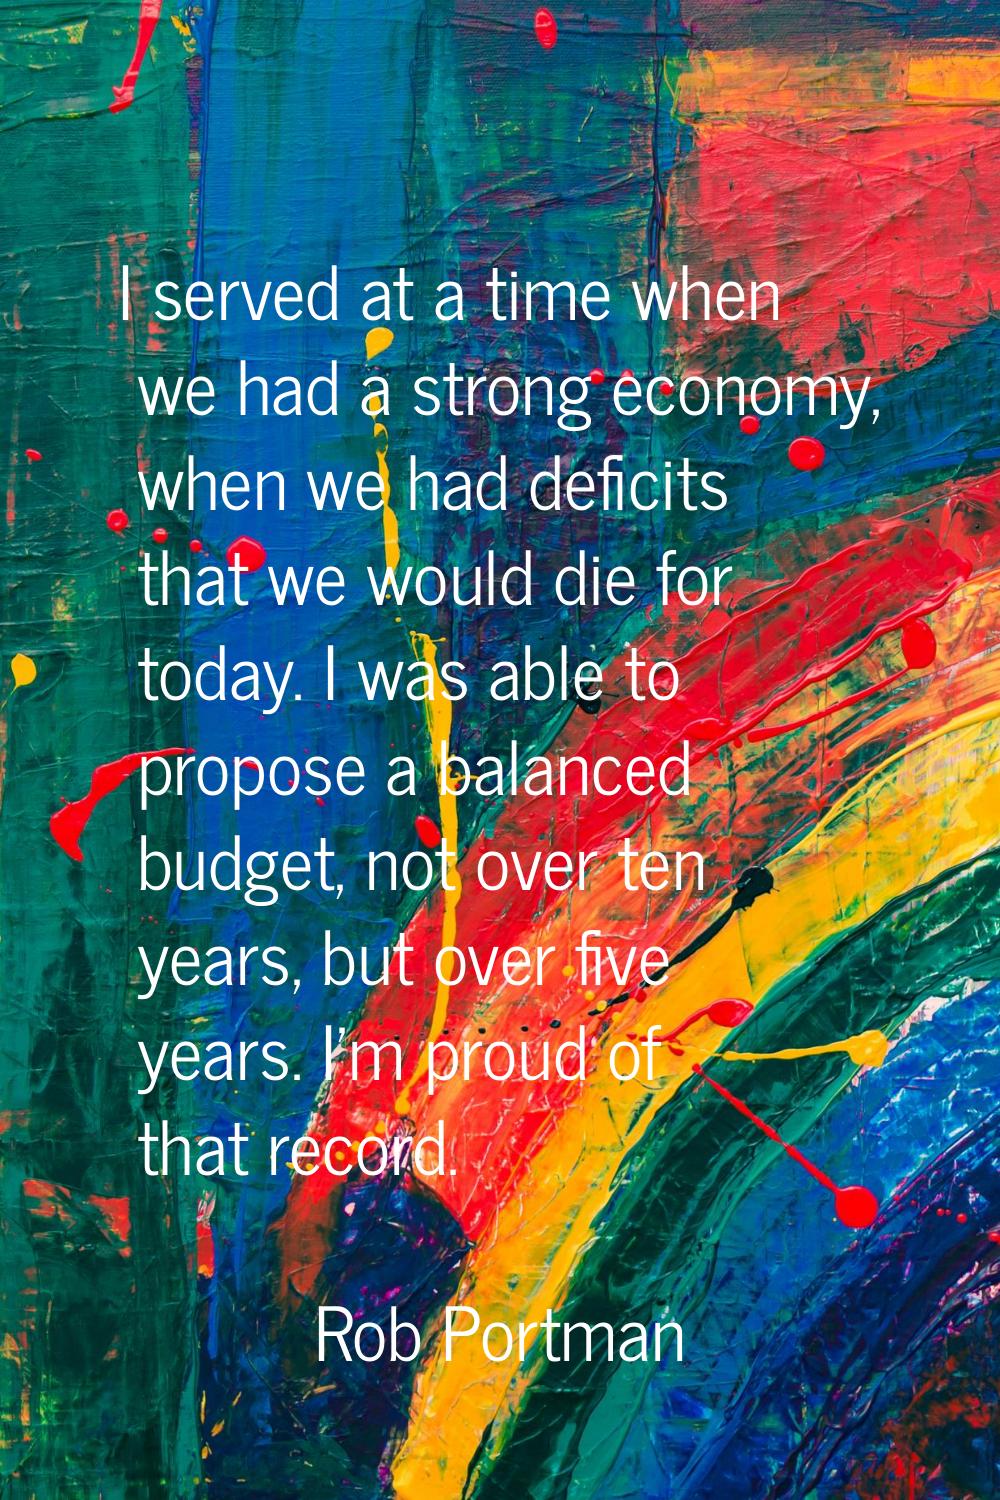 I served at a time when we had a strong economy, when we had deficits that we would die for today. 